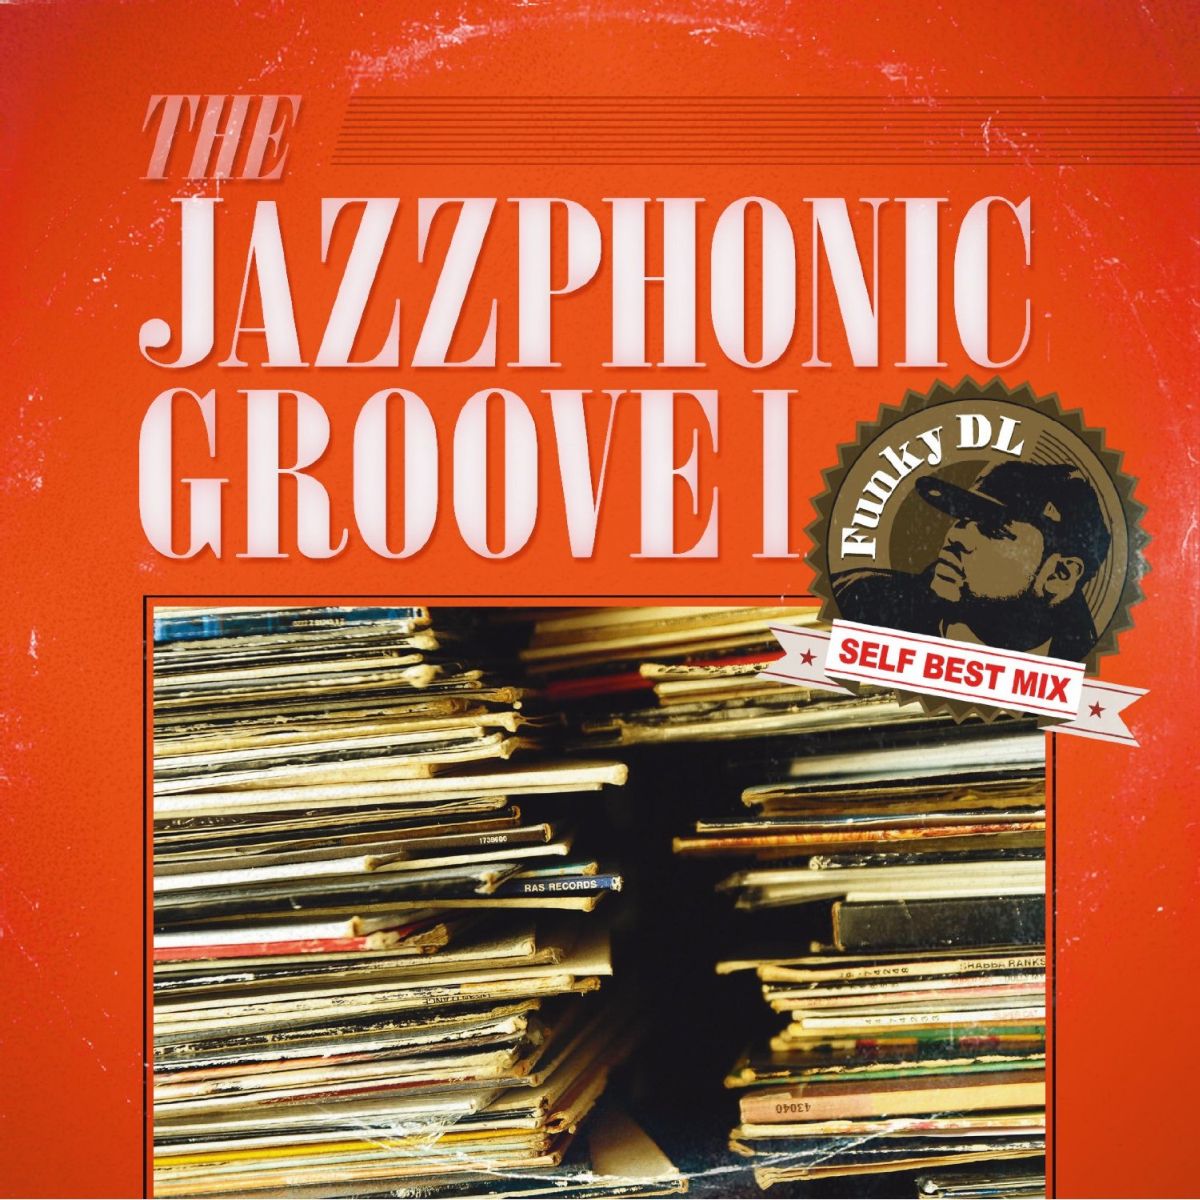 THE JAZZPHONIC GROOVE 1 Funky DL SELF BEST MIX